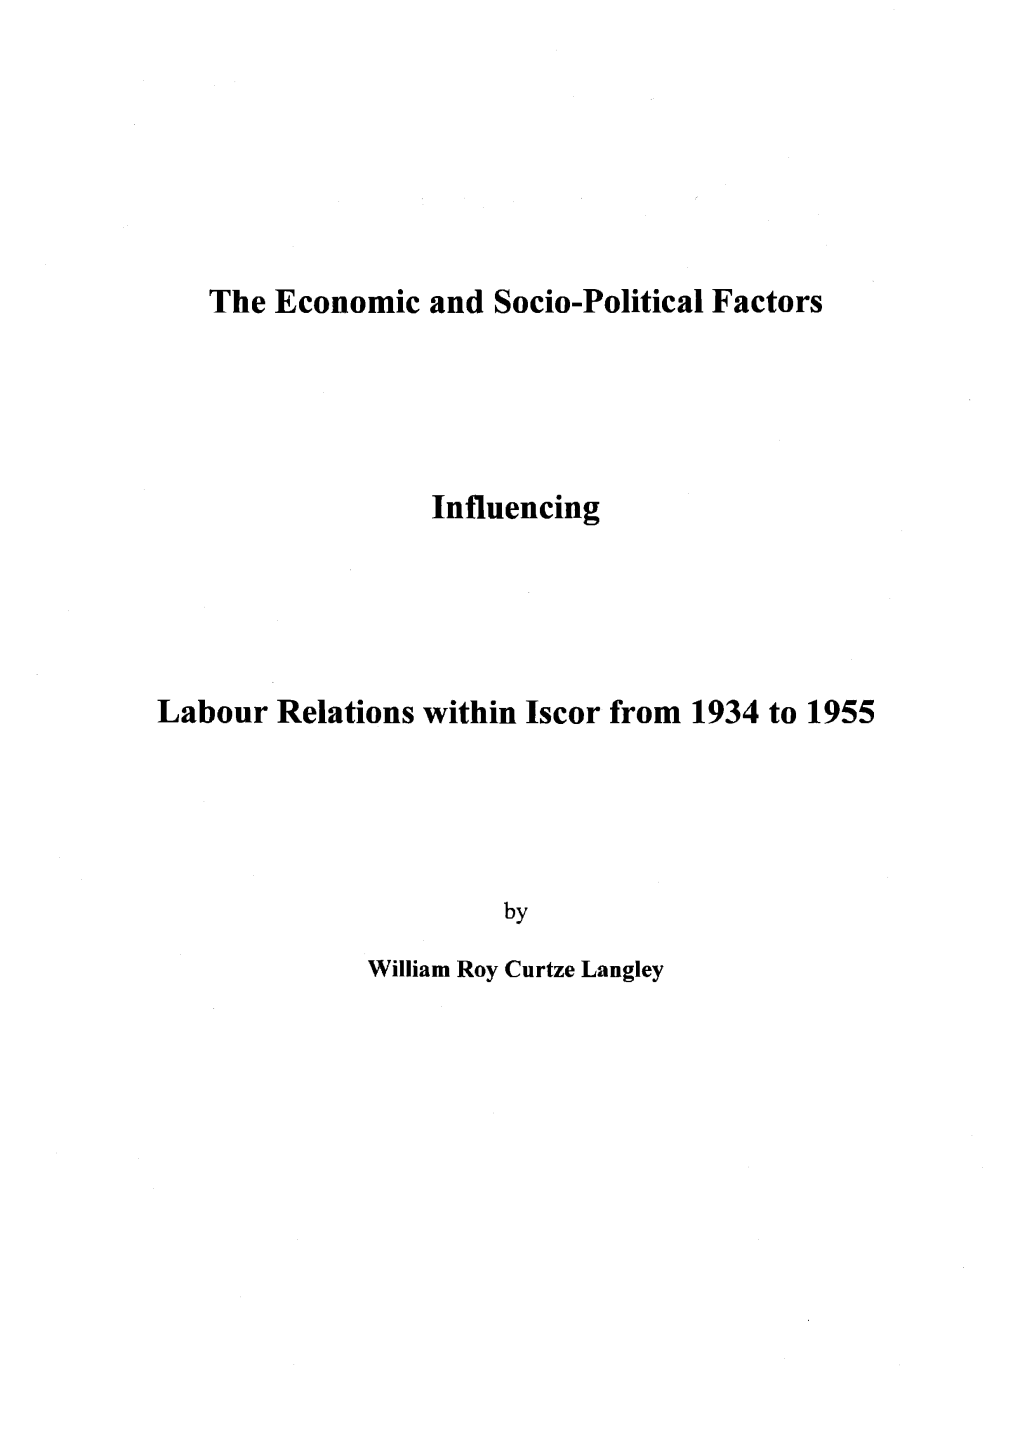 The Economic and Socio-Political Factors Influencing Labour Relations Within Iscor from 1934 to 1955